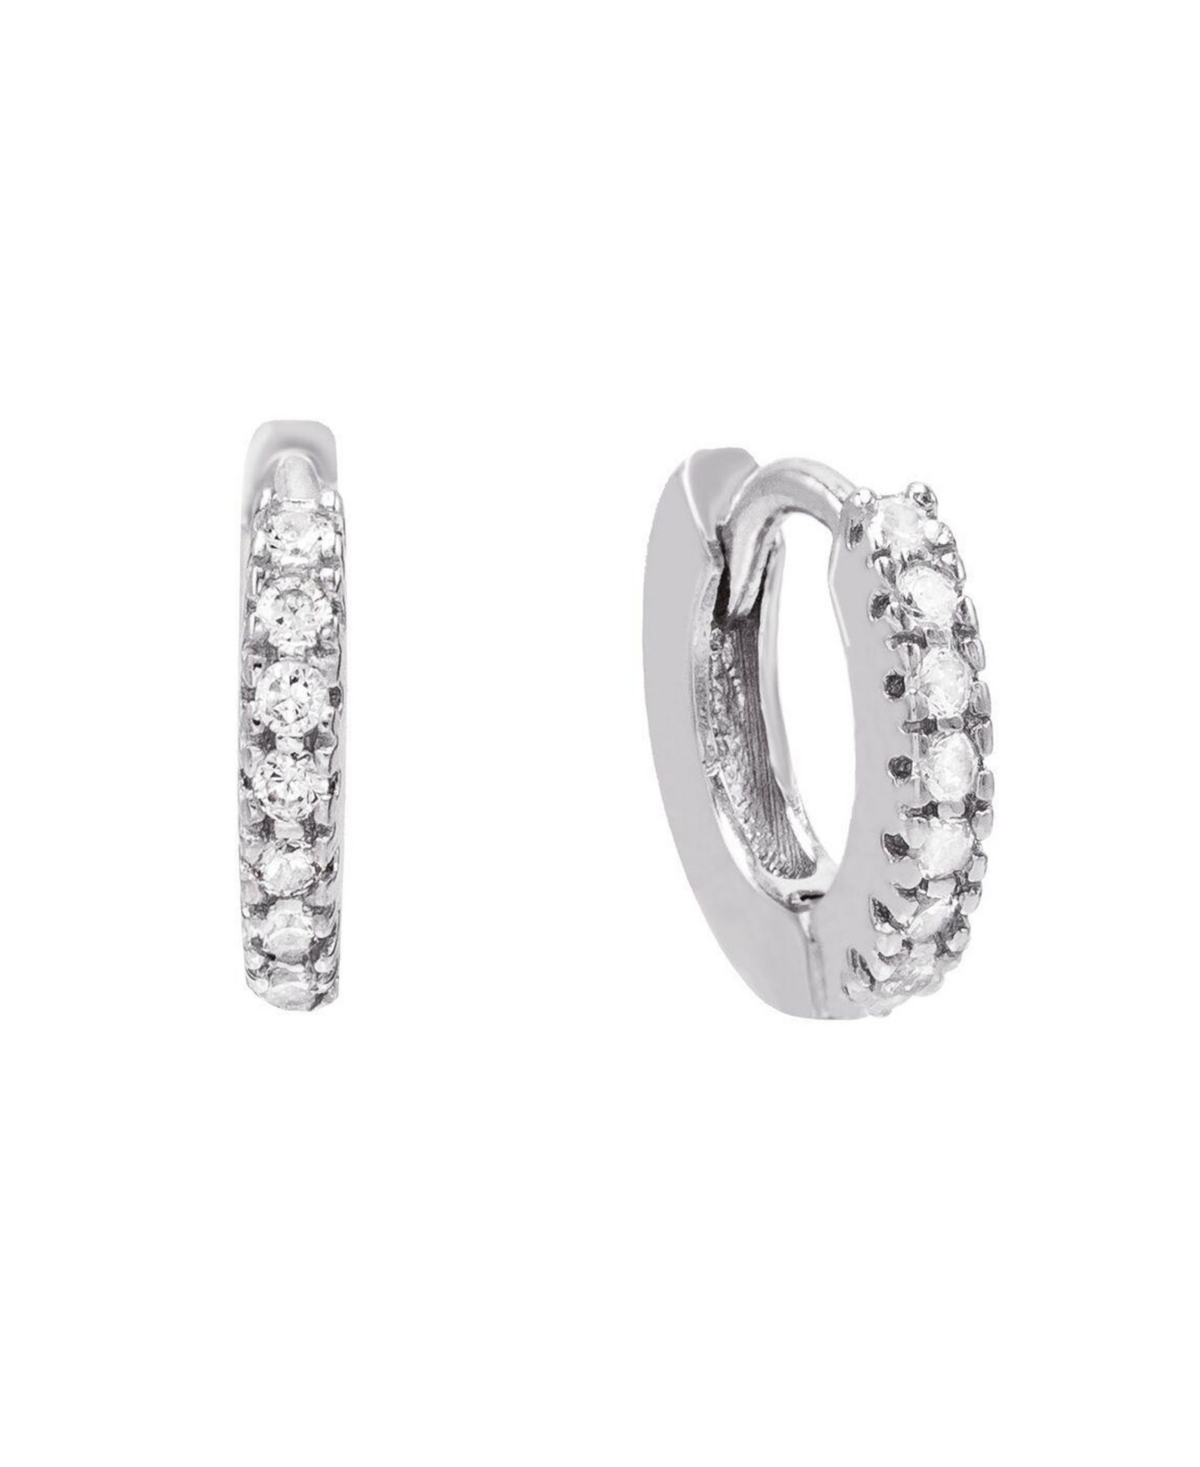 Cubic Zirconia Mini Huggie Earring in 14k Gold Plated Over Sterling Silver - Silver